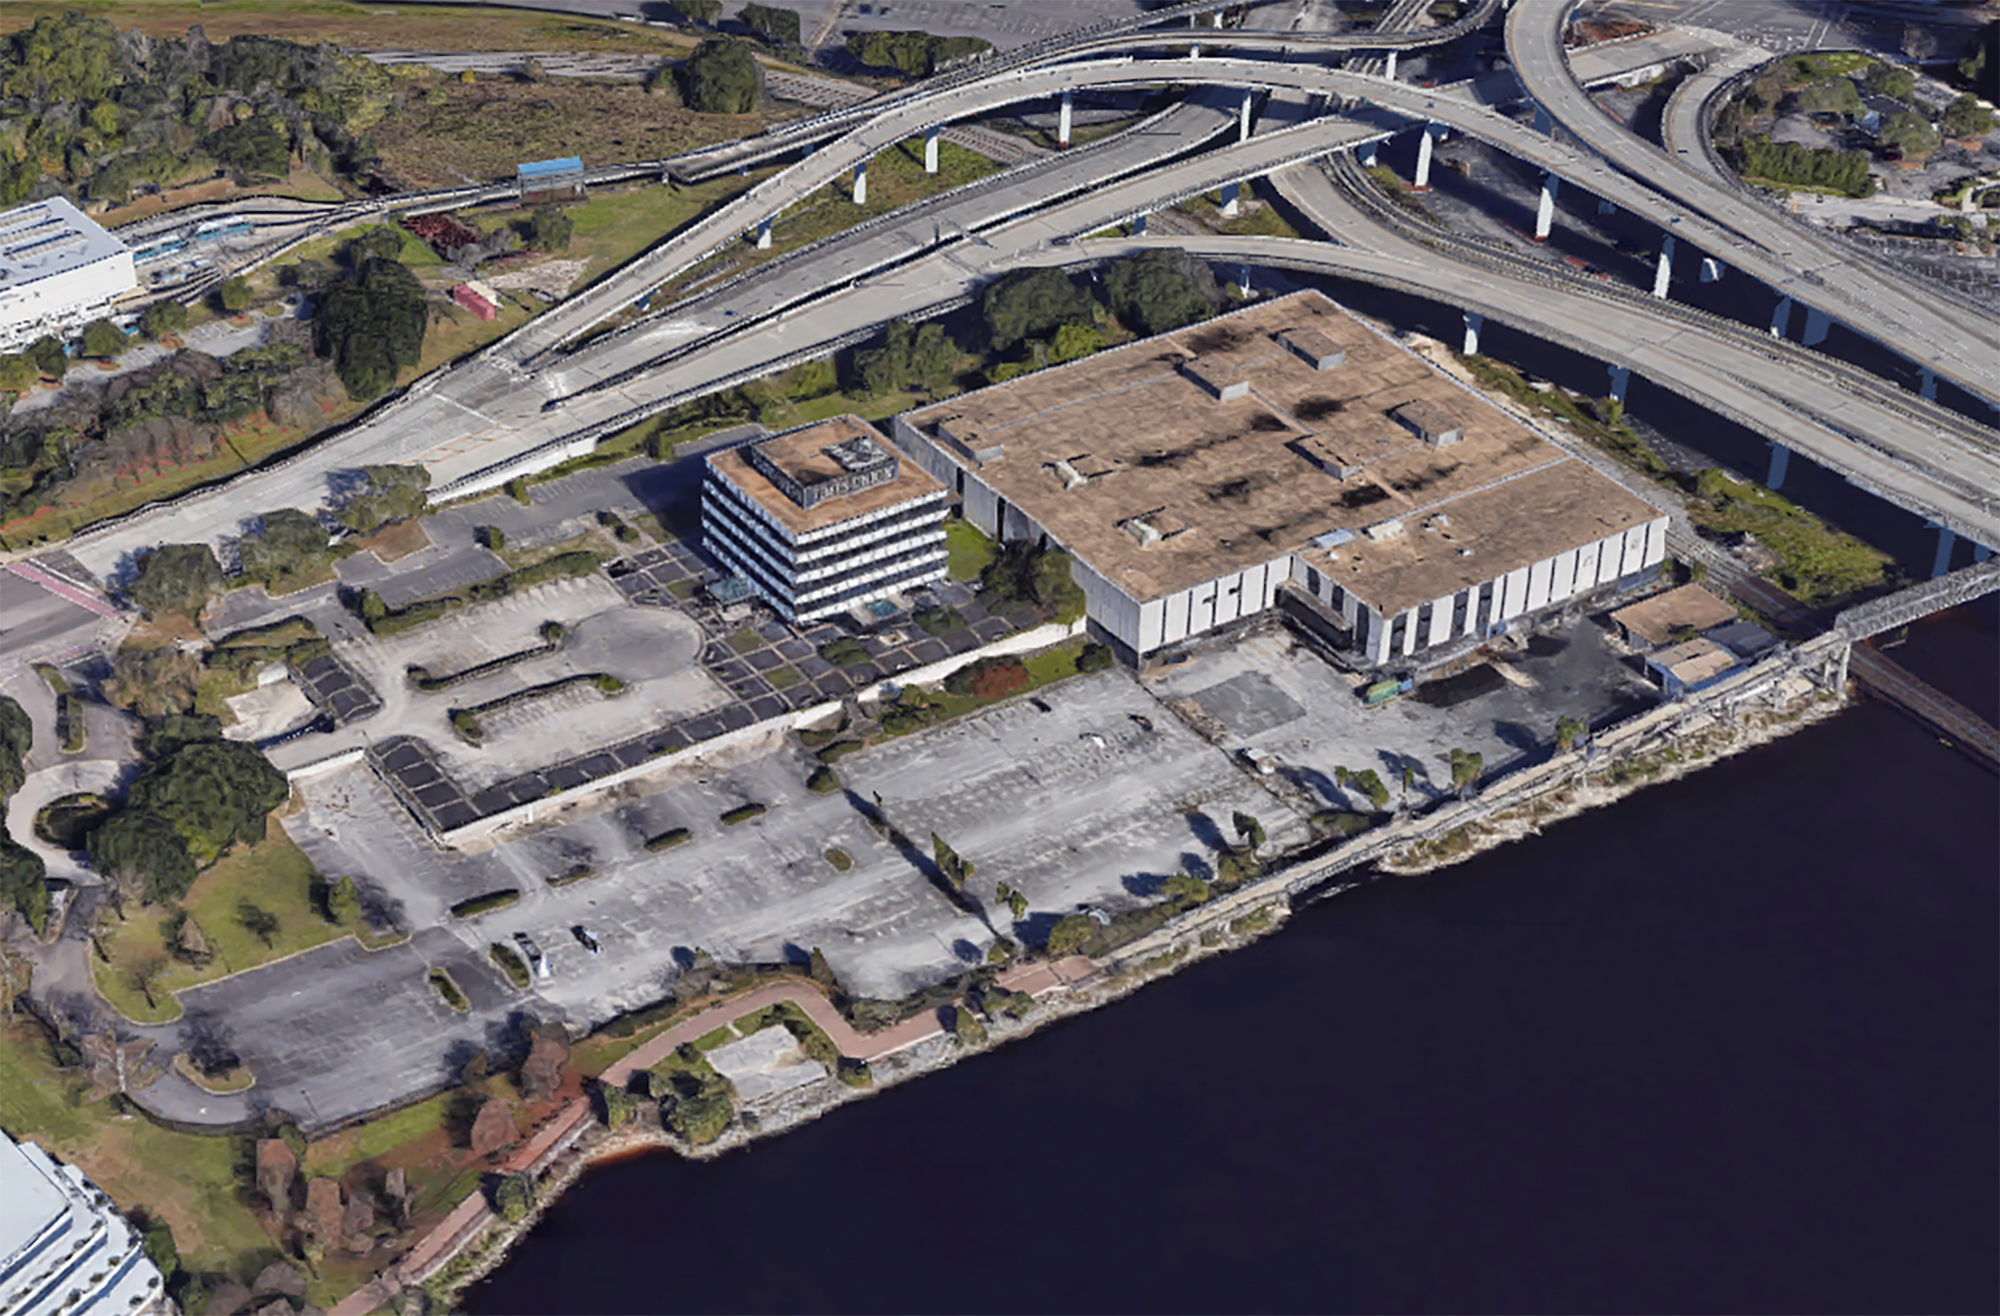 A satellite image of The Florida Times-Union property. The square tower structure is the former administration building. The newsroom, advertising and printing facility is at right.